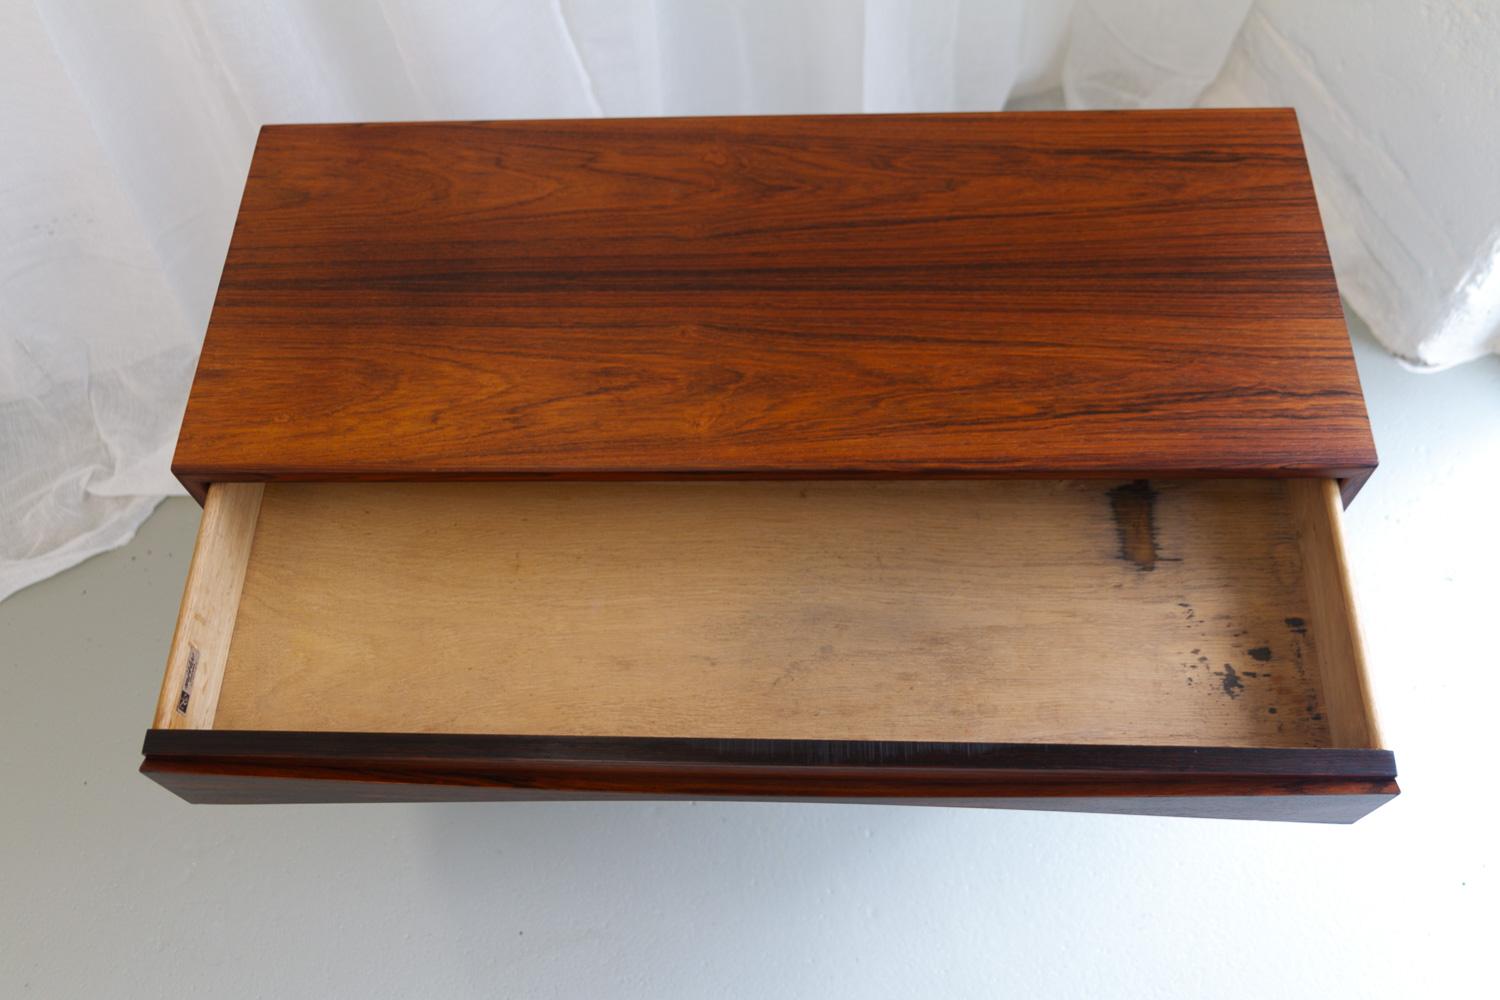 Danish Modern Rosewood Bedside Chest by Niels Clausen for NC Møbler, 1960s. For Sale 2